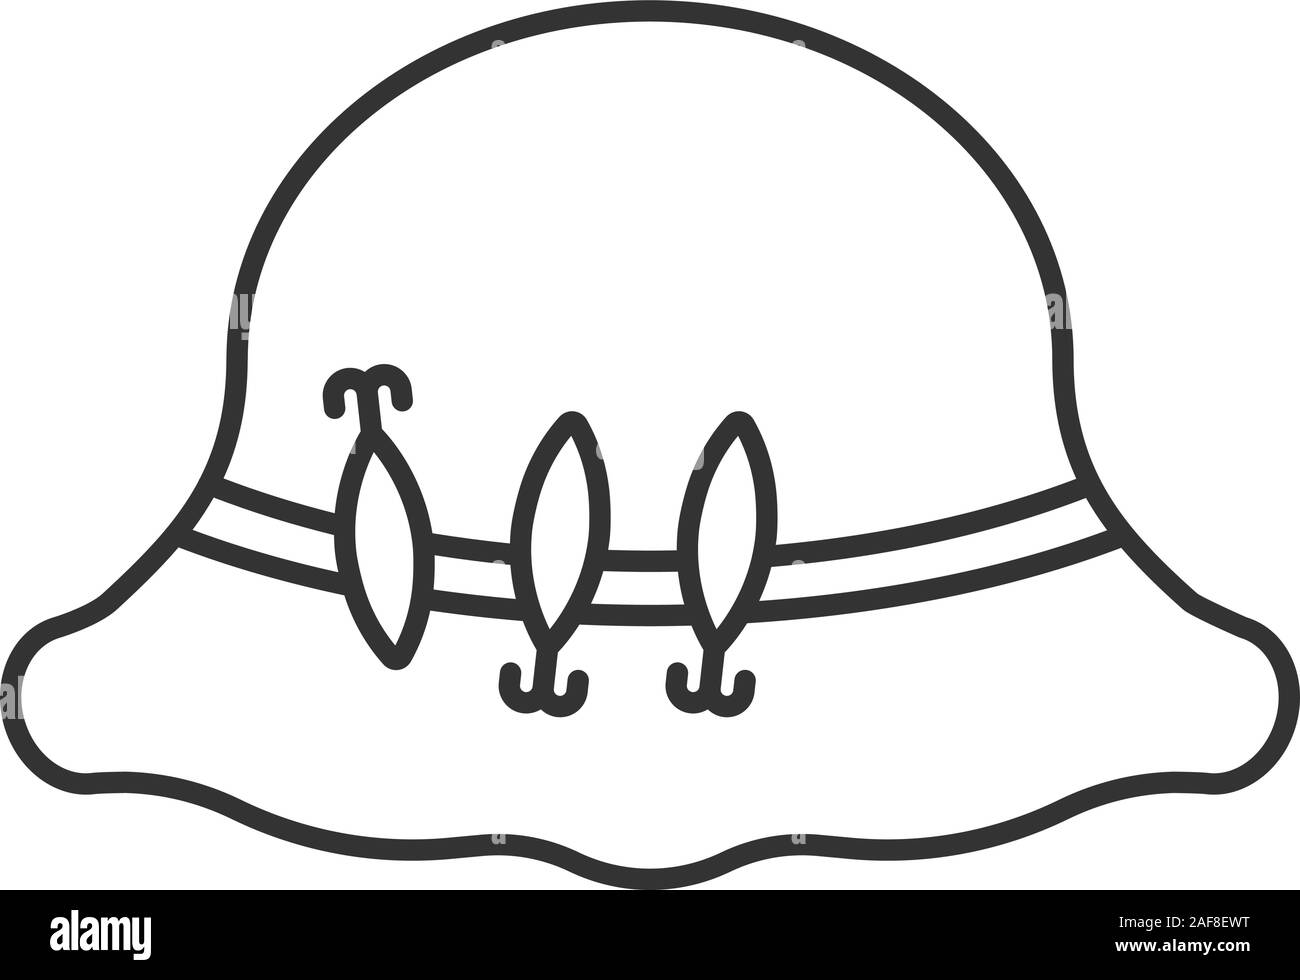 Fisherman's hat with hooks linear icon. Fishing equipment. Thin line illustration. Contour symbol. Vector isolated outline drawing Stock Vector